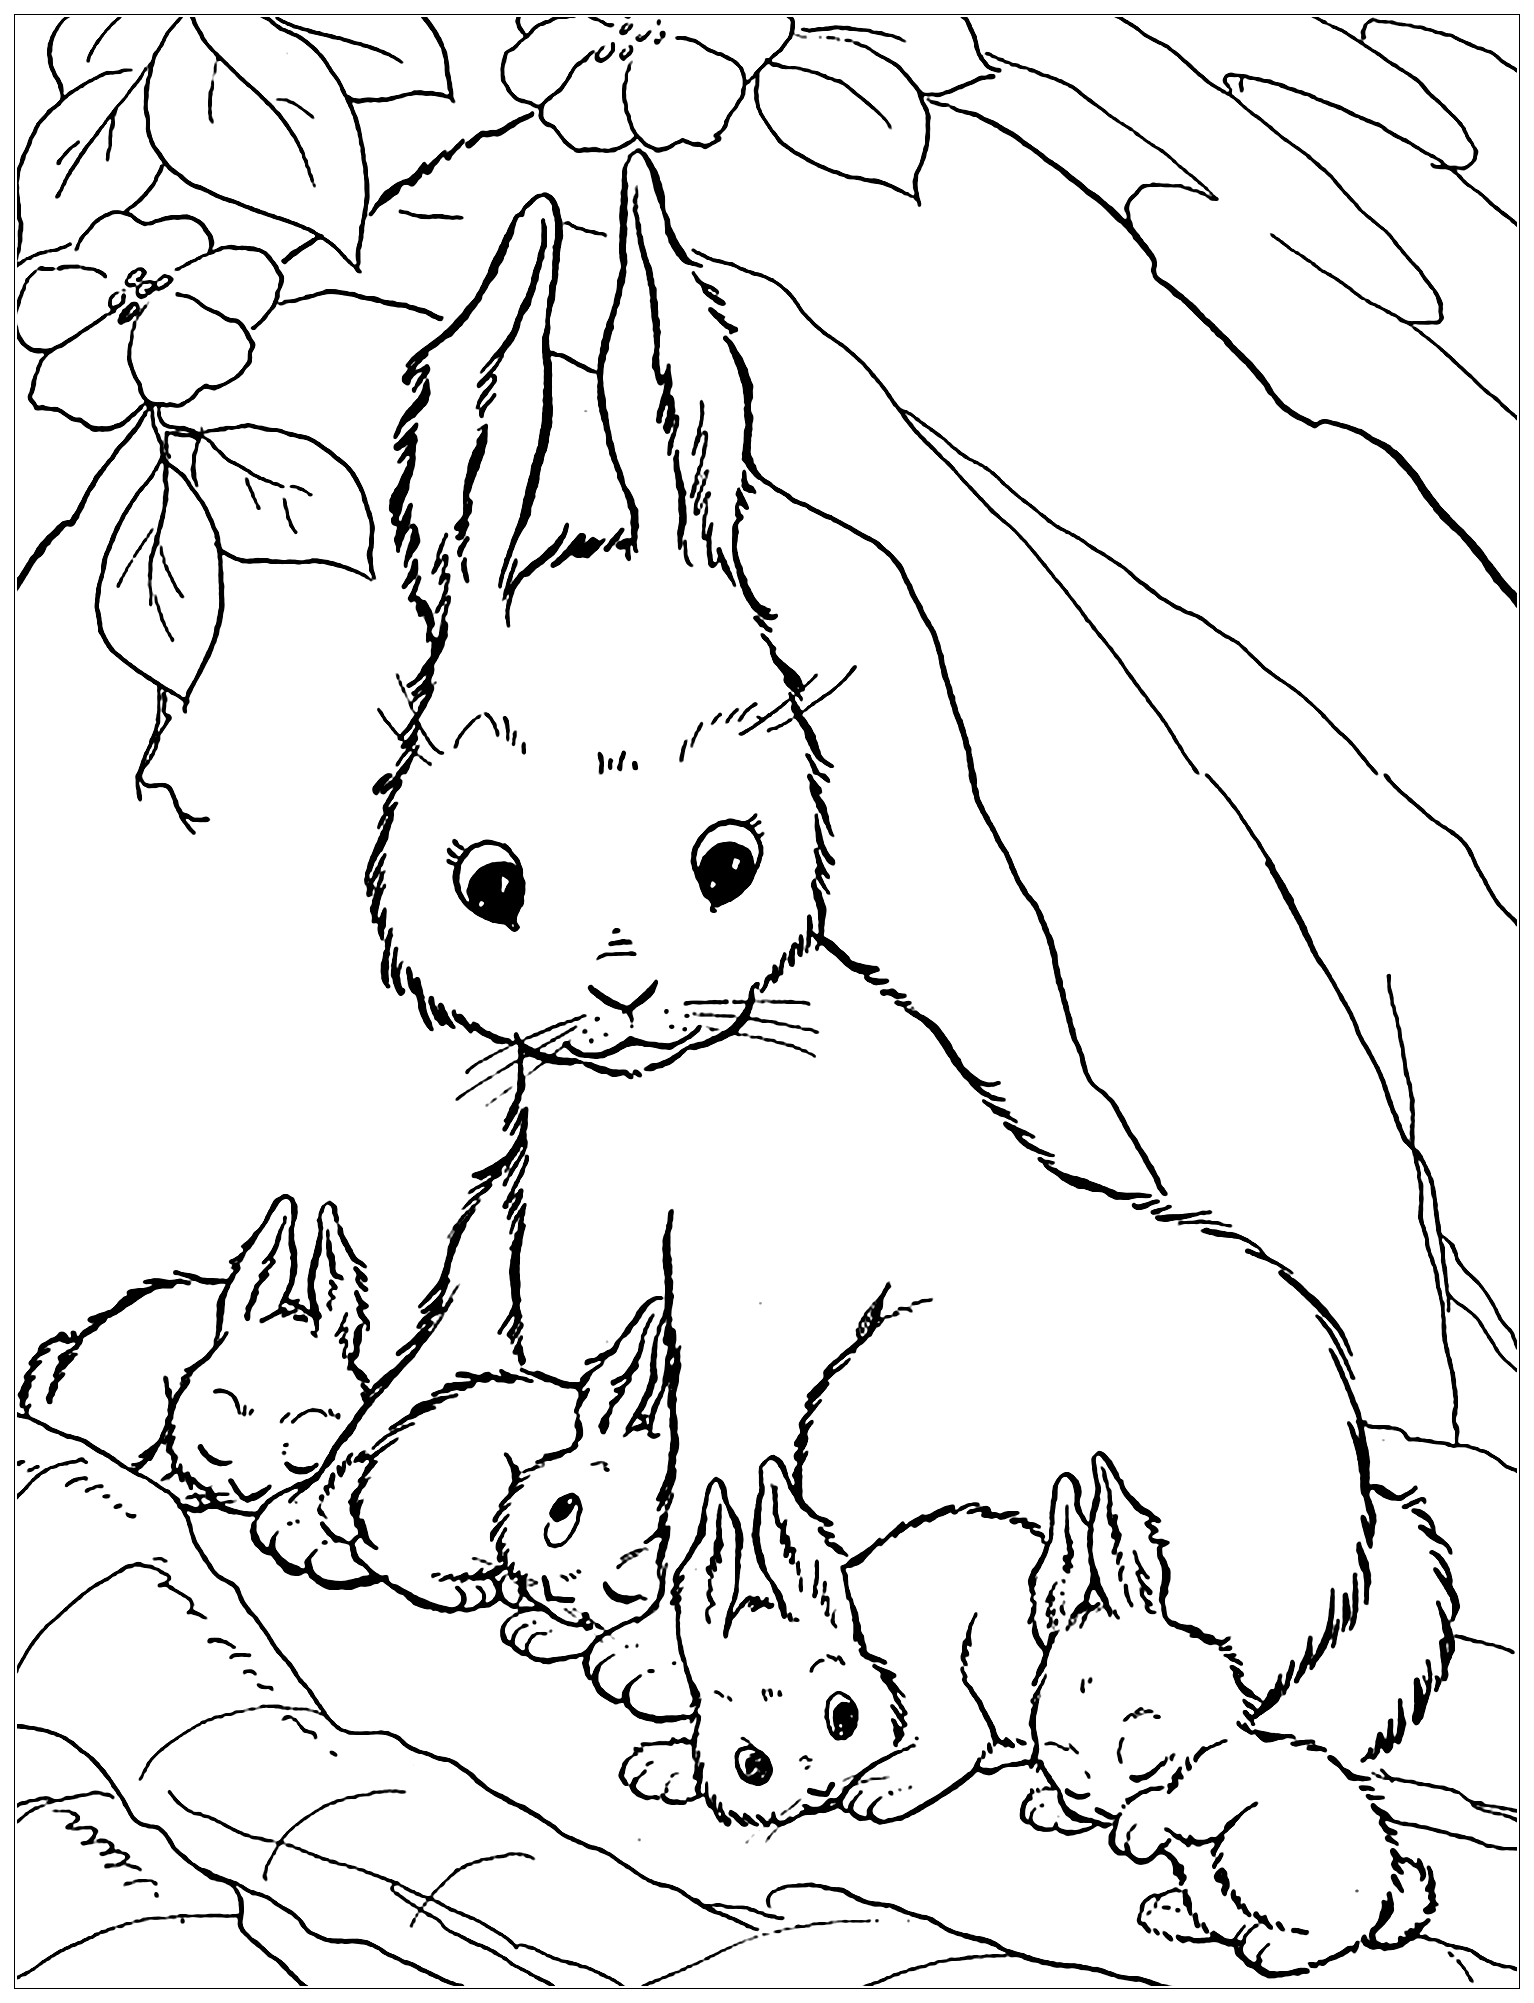 Rabbit & bunnies picture to color, easy for kids